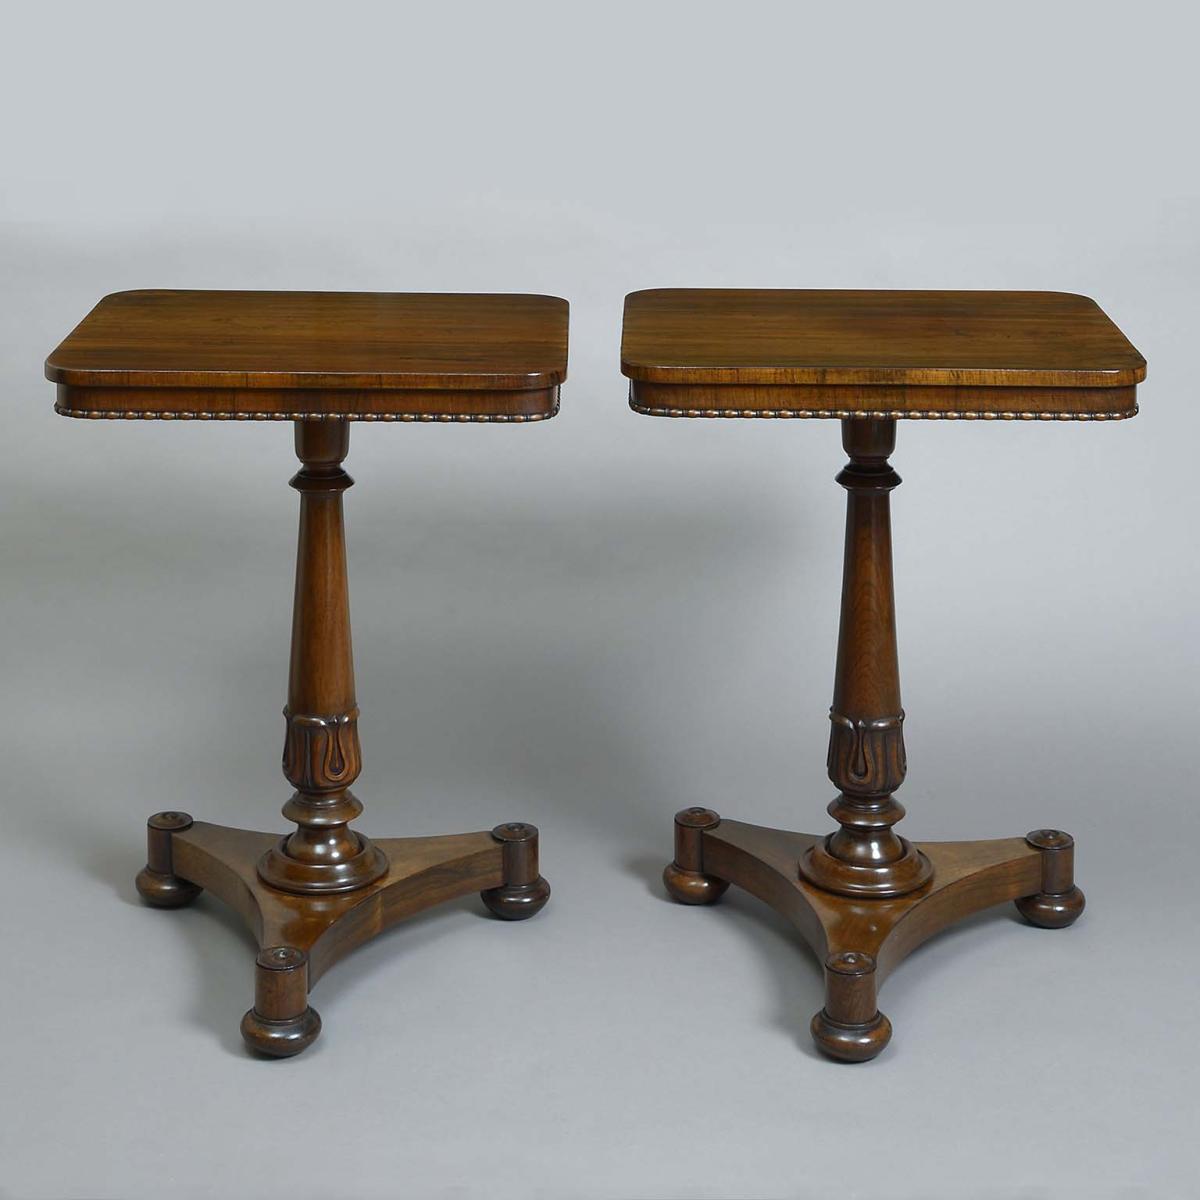 William IV Rosewood Occasional Tables